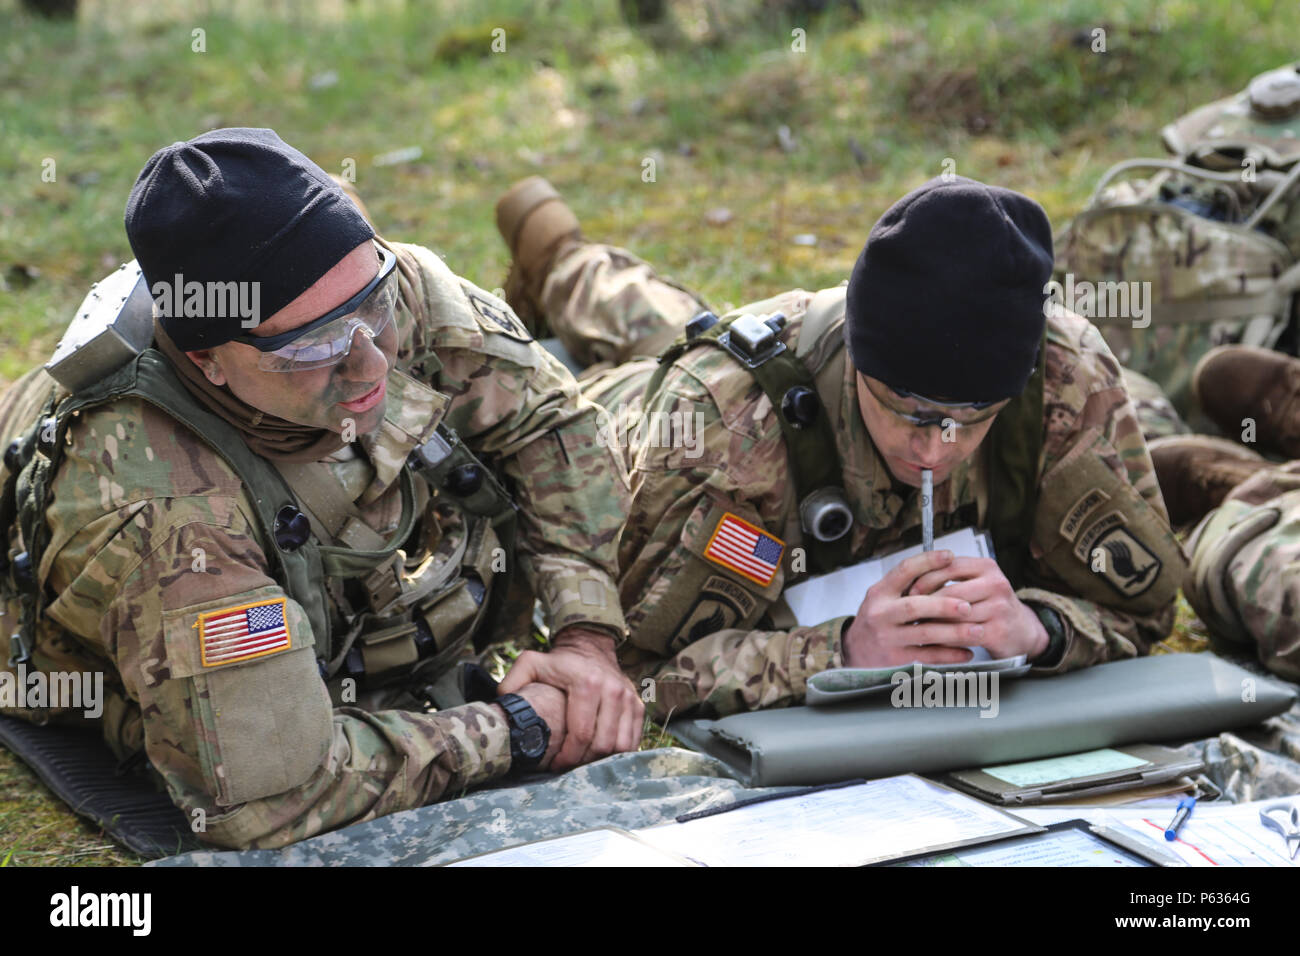 U.S. Soldiers of the 173rd Airborne Brigade discuss mission updates while conducting a pre-mission brief during exercise Saber Junction 16 at the U.S. Army’s Joint Multinational Readiness Center (JMRC) in Hohenfels, Germany, April 14, 2016. Saber Junction 16 is the U.S. Army Europe’s 173rd Airborne Brigade’s combat training center certification exercise, taking place at the JMRC in Hohenfels, Germany, Mar. 31-Apr. 24, 2016.  The exercise is designed to evaluate the readiness of the Army’s Europe-based combat brigades to conduct unified land operations and promote interoperability in a joint, m Stock Photo